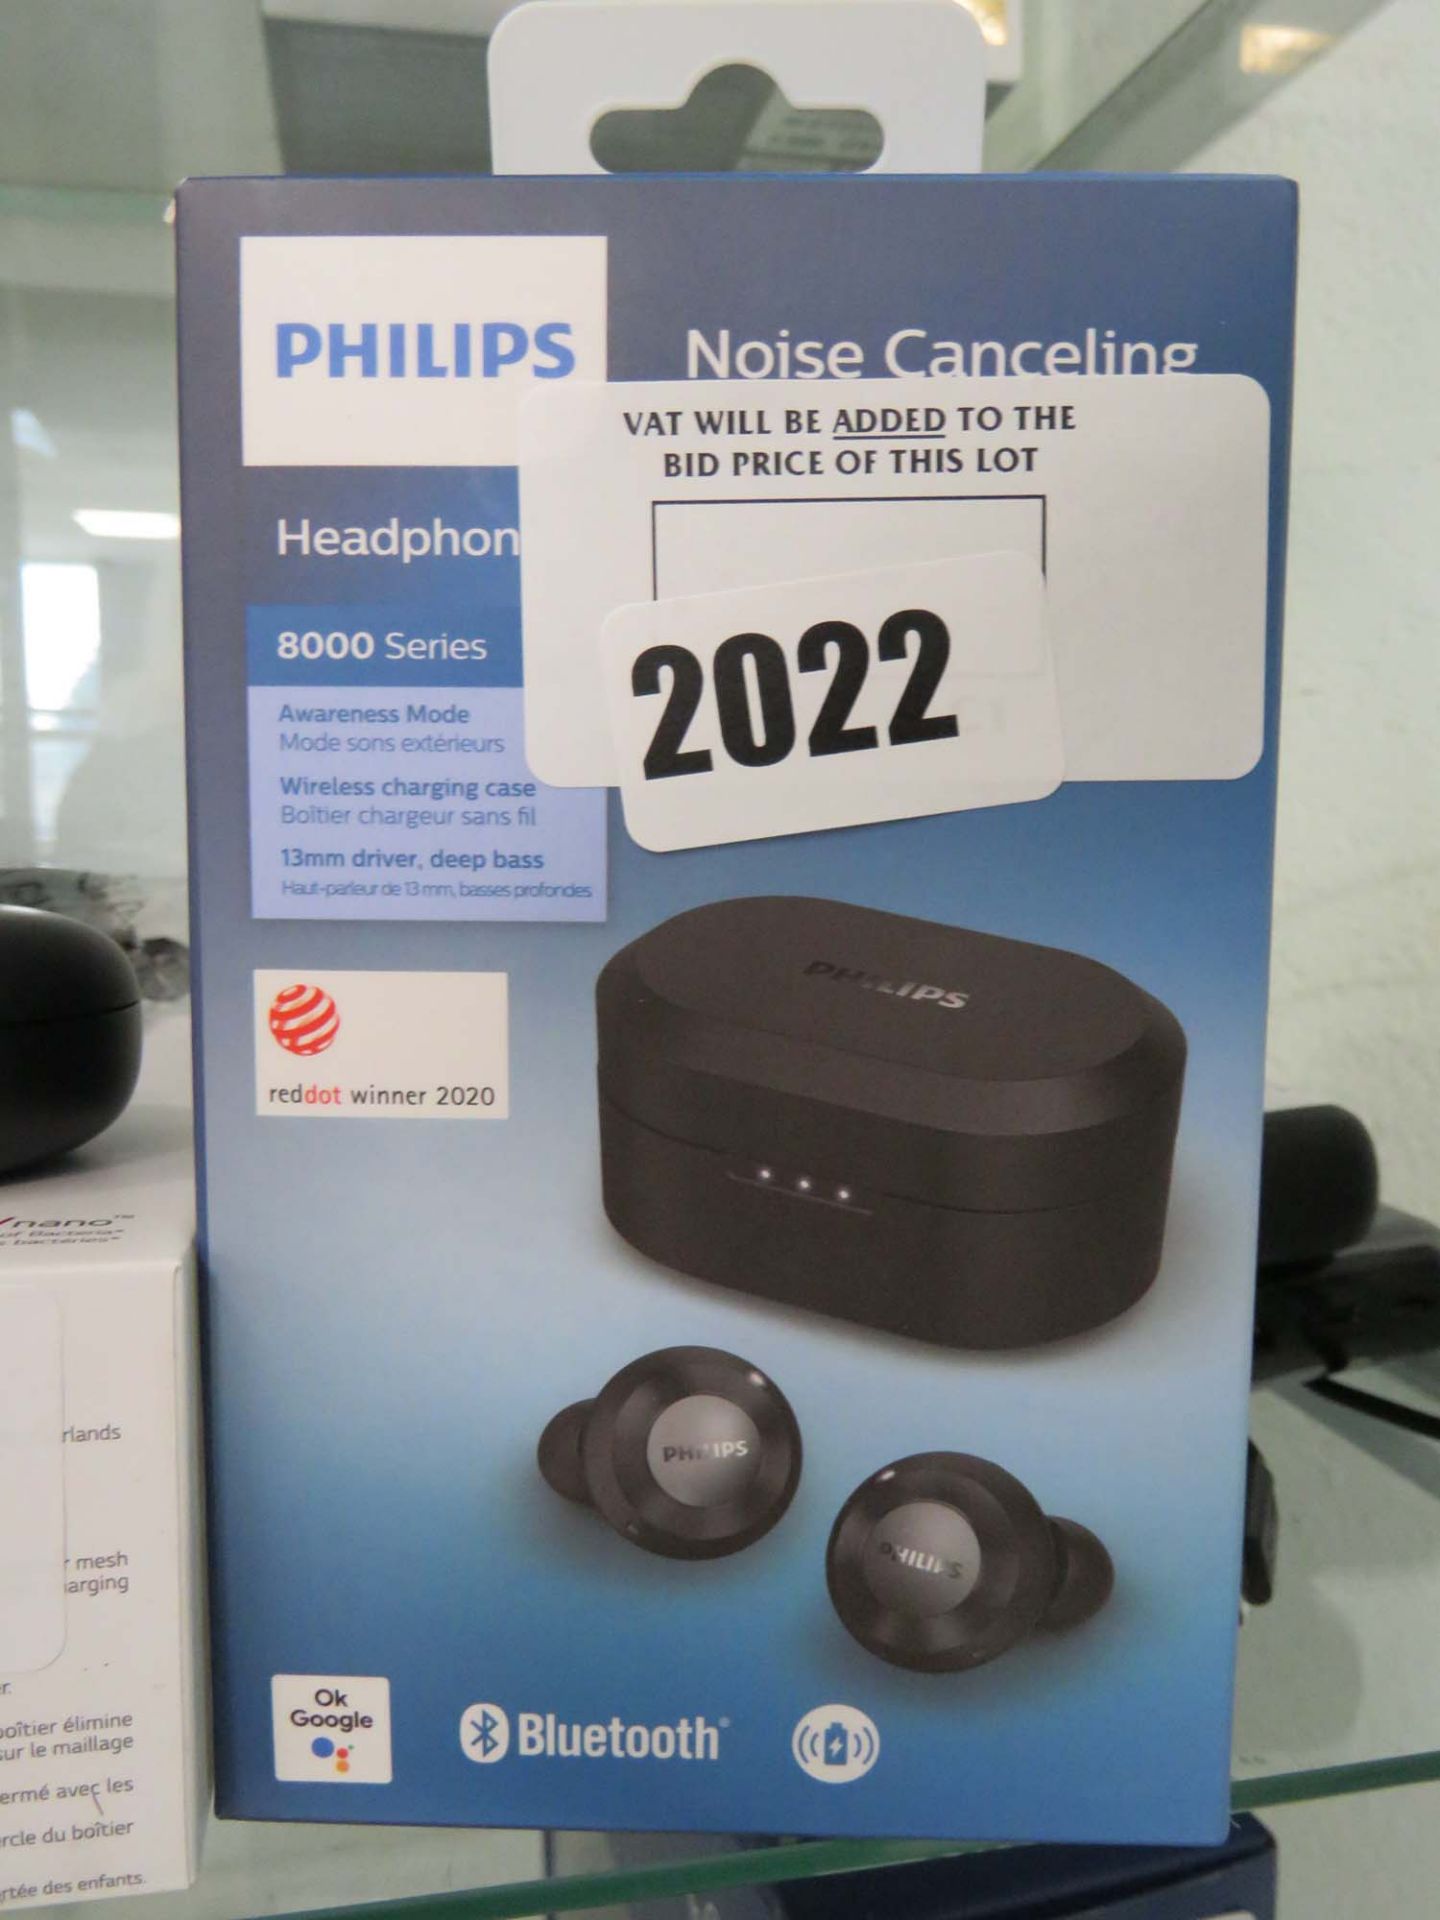 Philips noise cancelling headphones 8000 Series with box